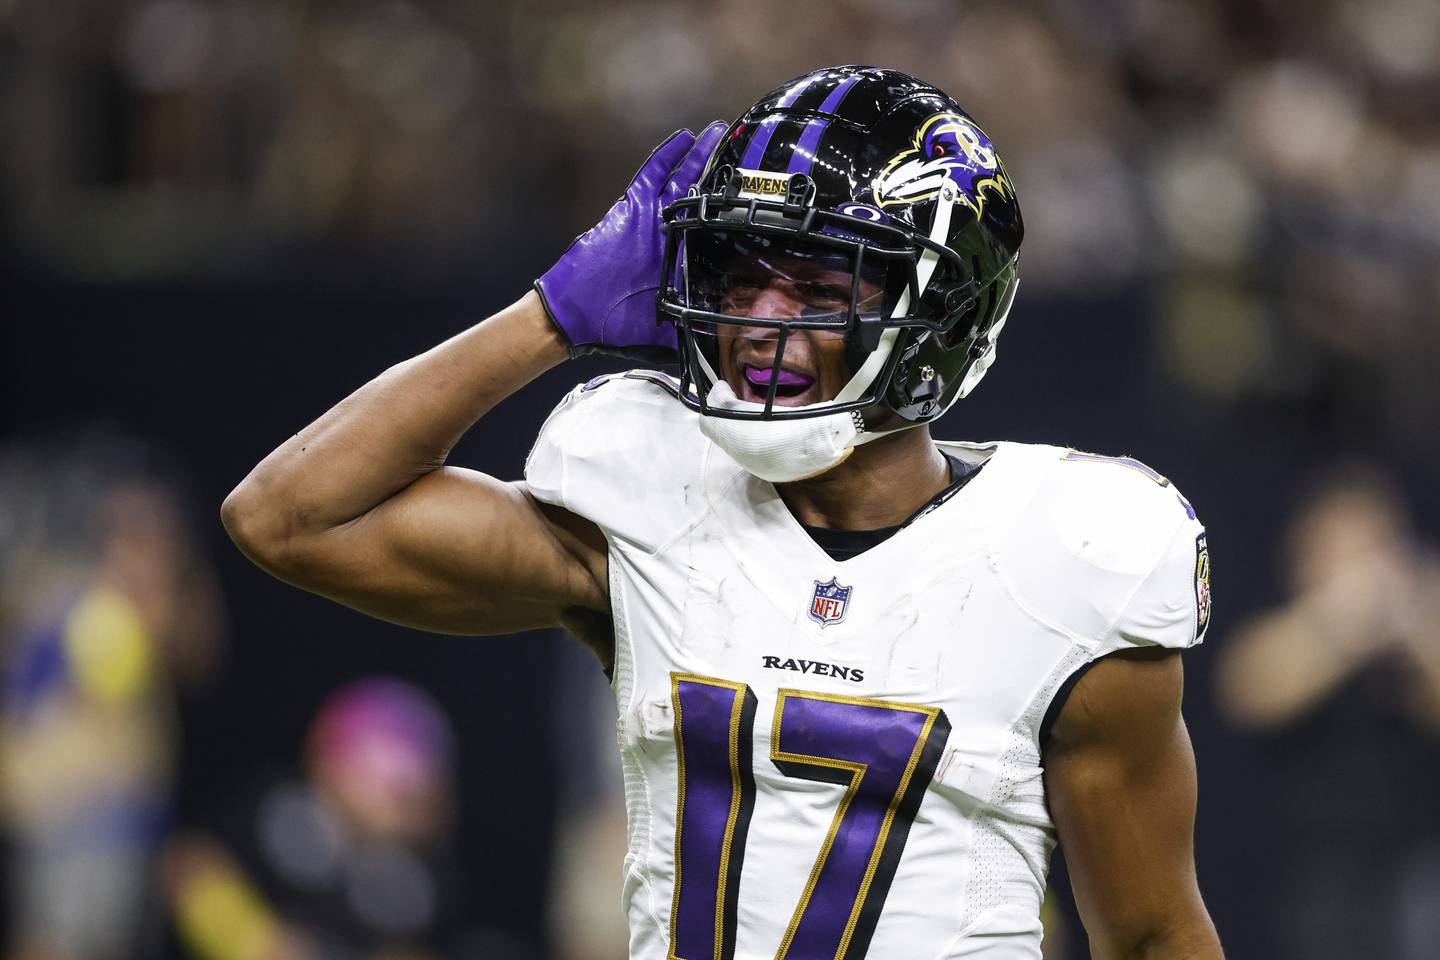 This photo shows Baltimore Ravens running back Kenyon Drake holding his hand up to his ear as he celebrates scoring a touchdown.